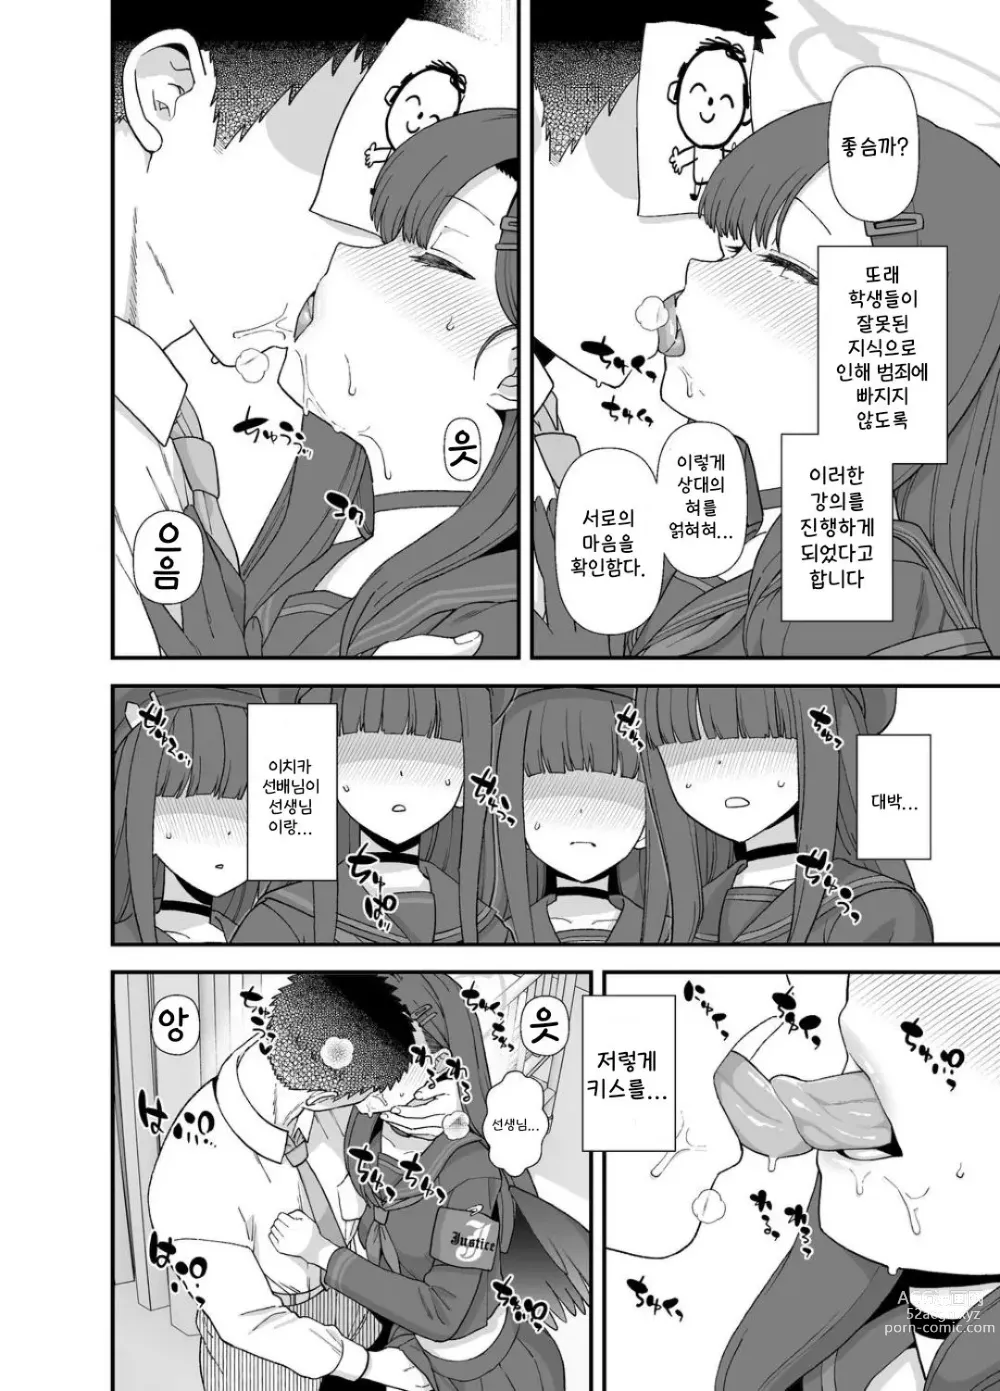 Page 2 of doujinshi 블루아카 이치카 섹스 만화